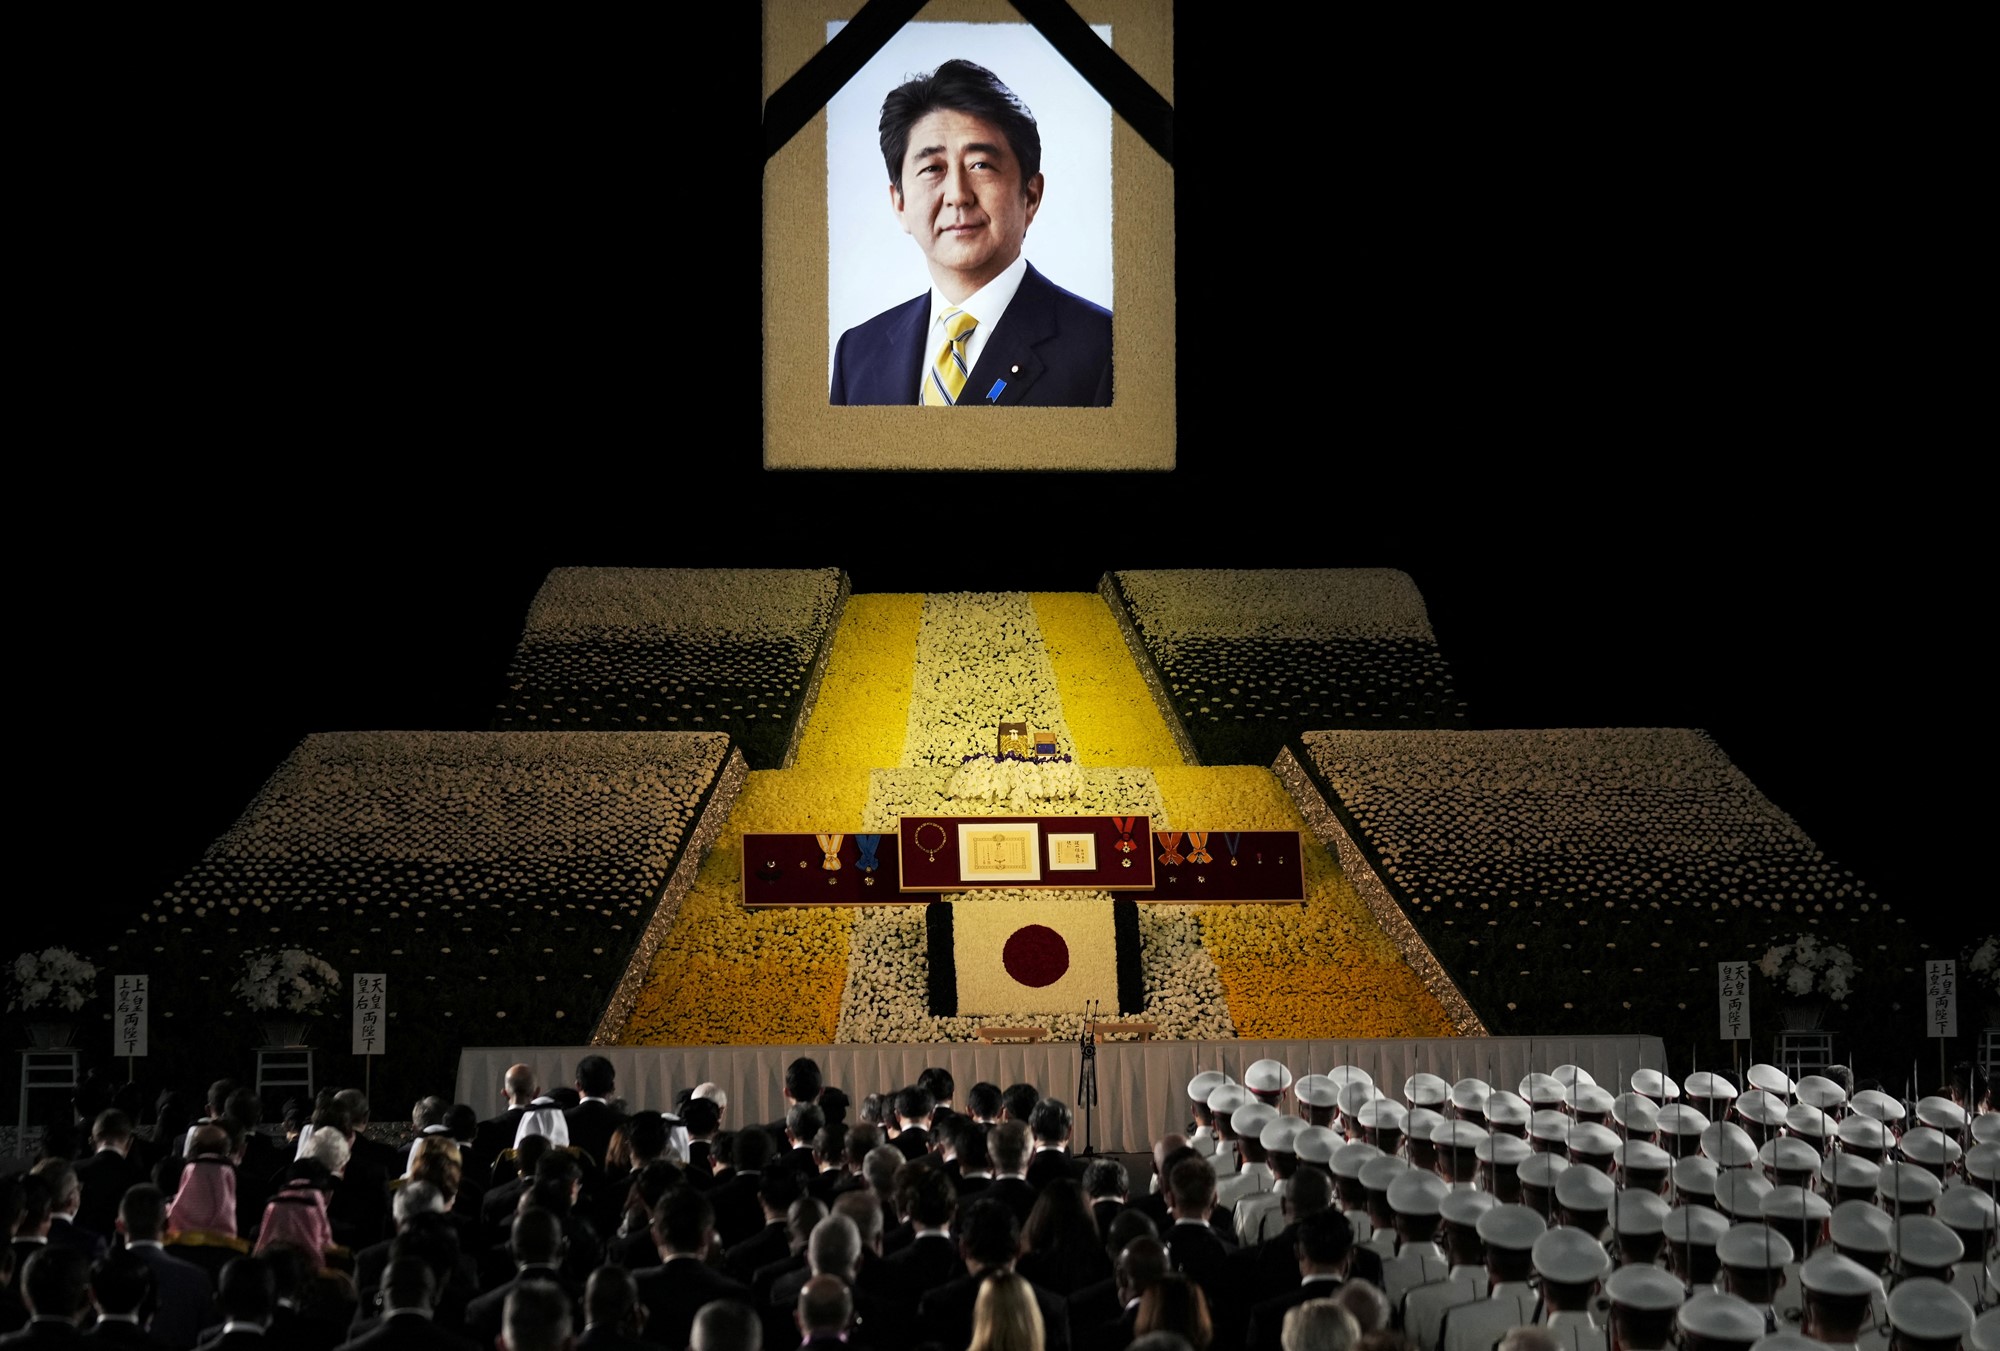 A portrait of former Japanese Prime Minister Shinzo Abe hangs on the stage during the state funeral of former Japanese Prime Minister Shinzo Abe at Nippon Budokan in Tokyo